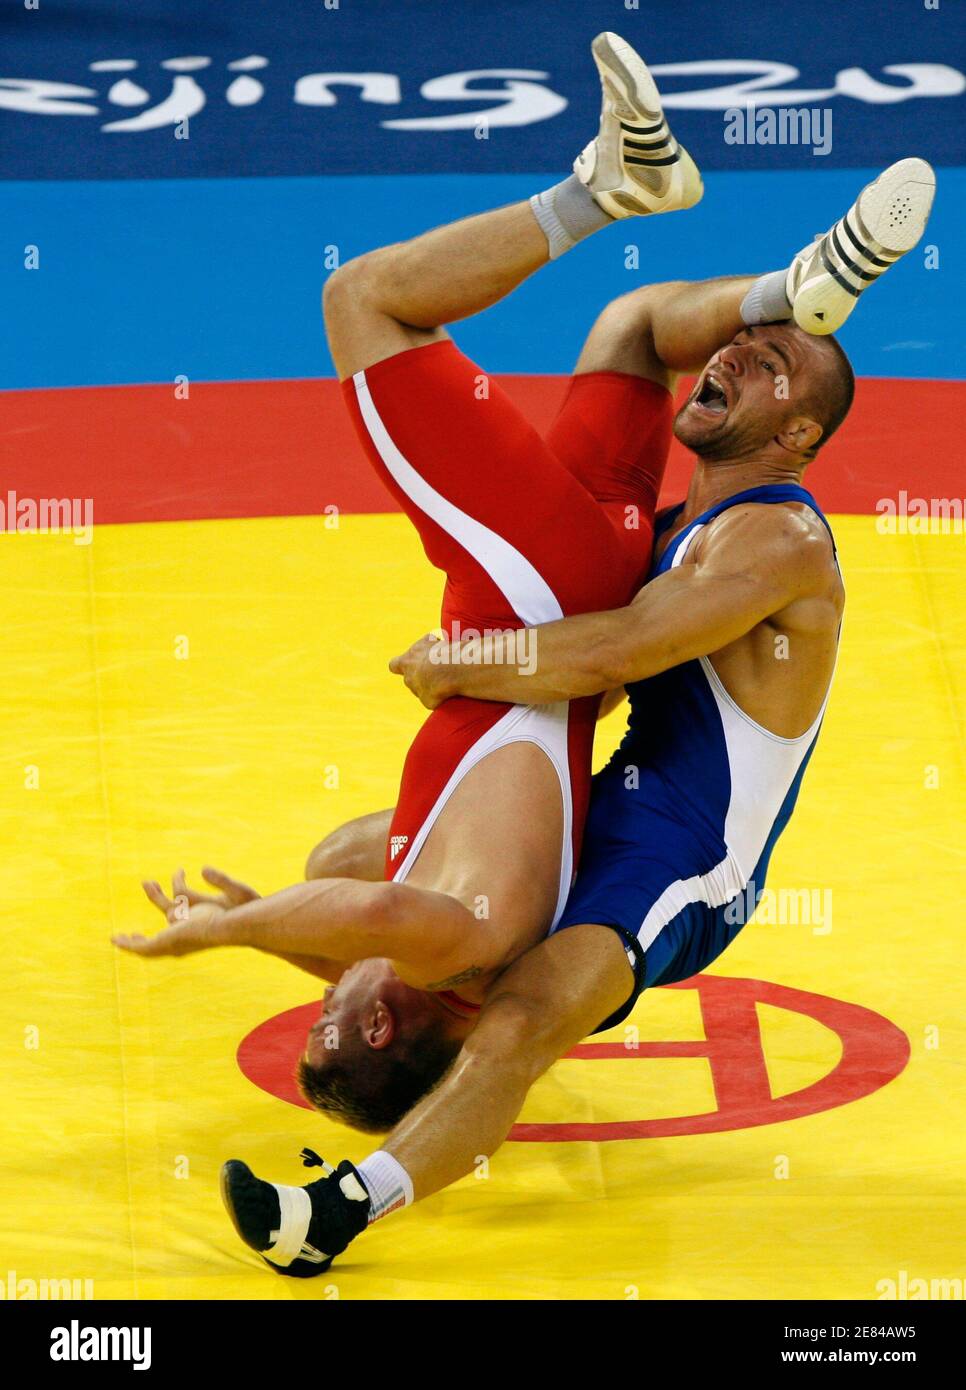 Aslanbek Khushtov of Russia (in blue) fights Mirko Englich of Germany at the men's 96kg Greco-Roman gold medal wrestling competition at the Beijing 2008 Olympic Games August 14, 2008.     REUTERS/Oleg Popov (CHINA) Stock Photo